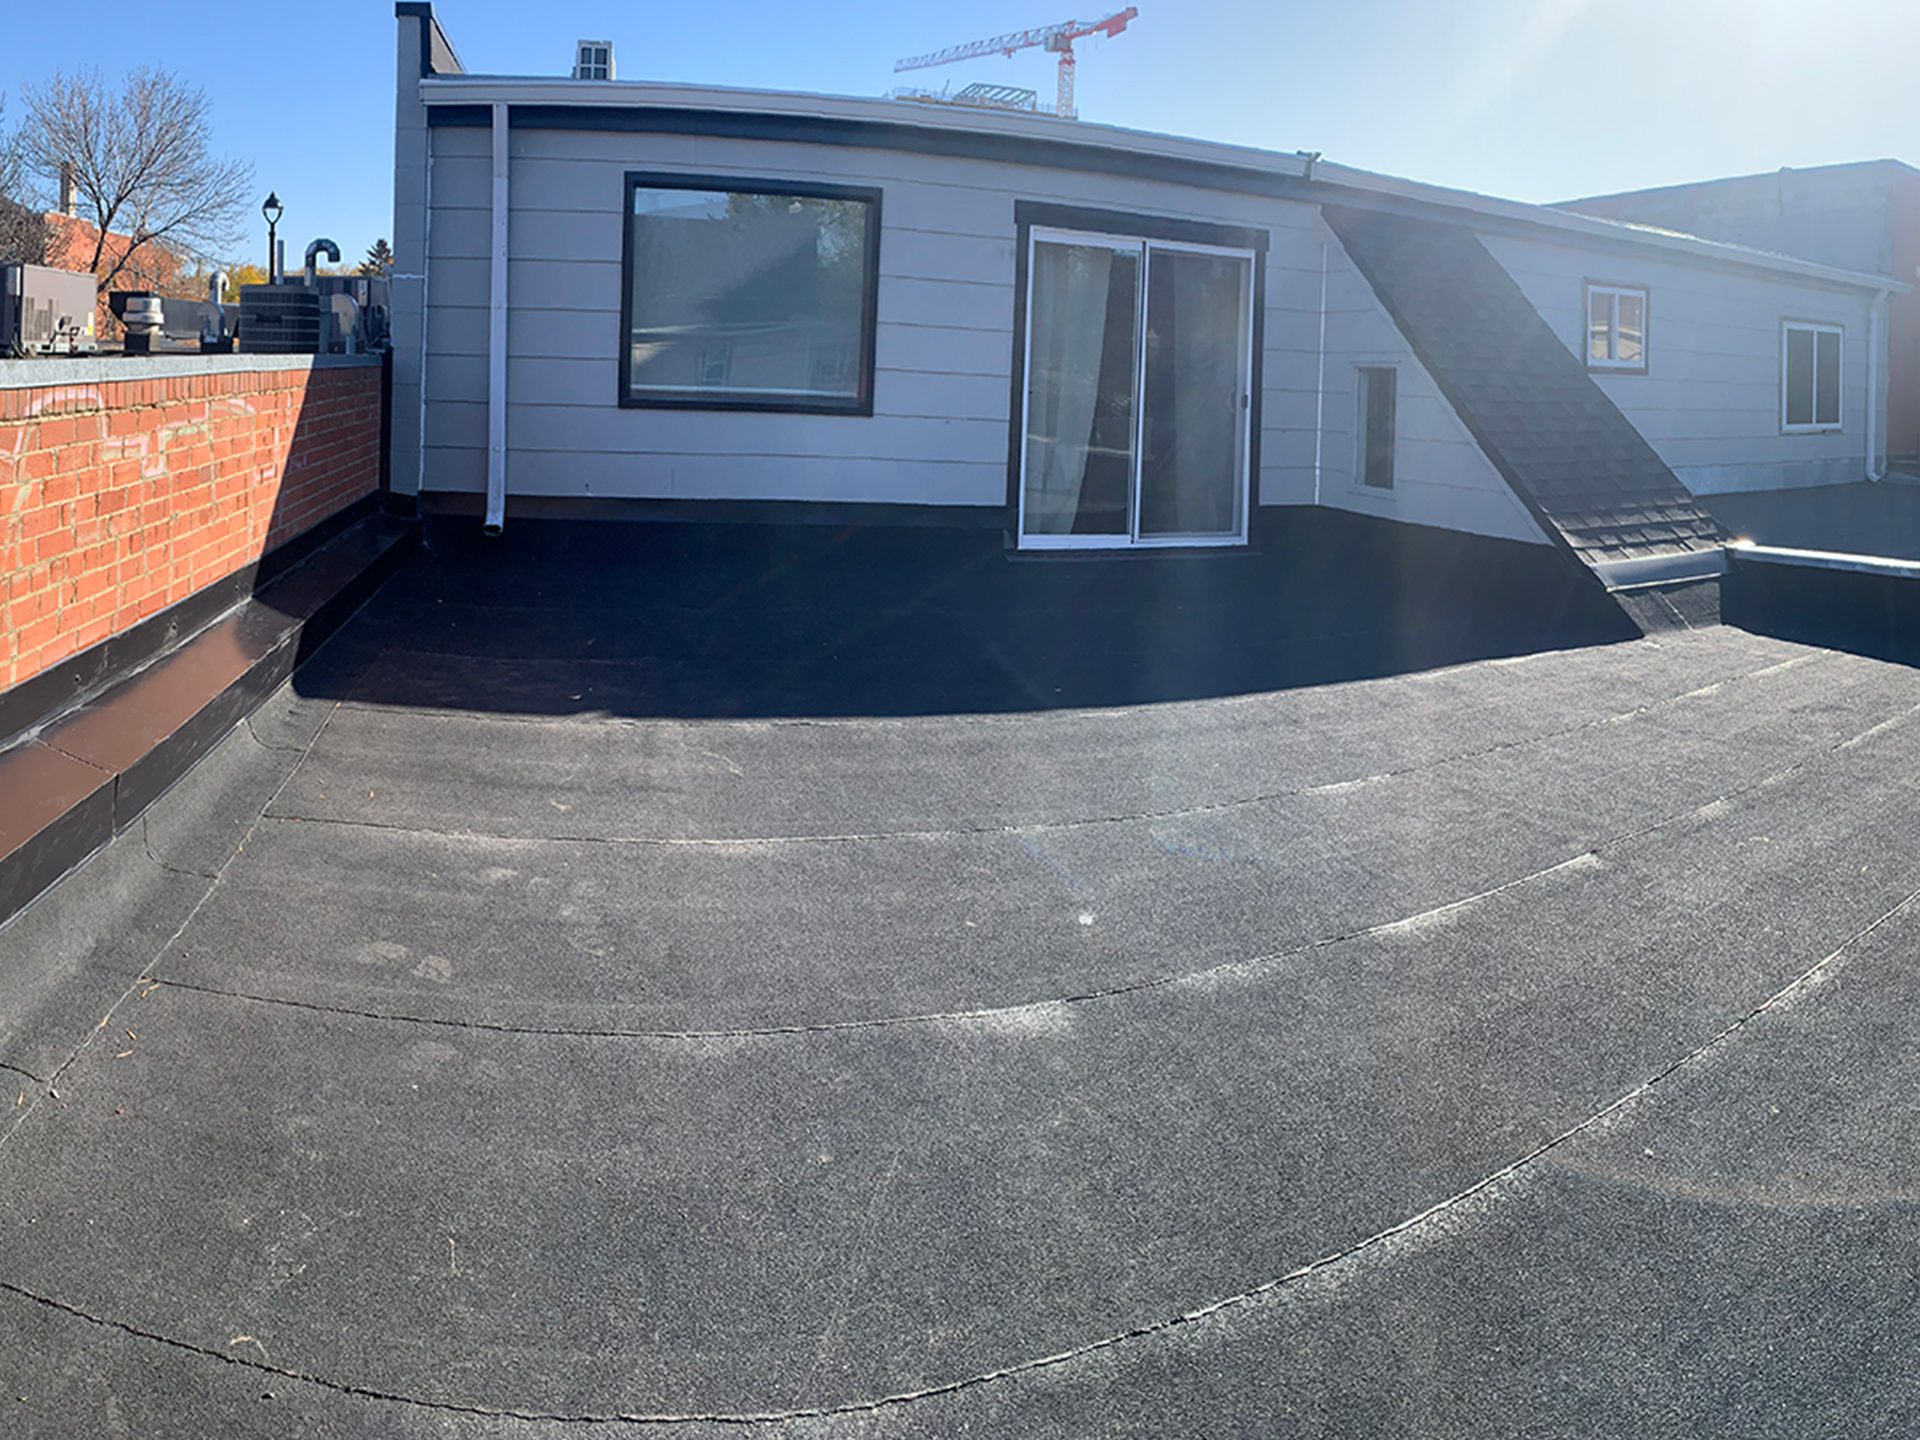 jr-and-co-roofing-contractors-completed-roof-service-project-completed-after-image